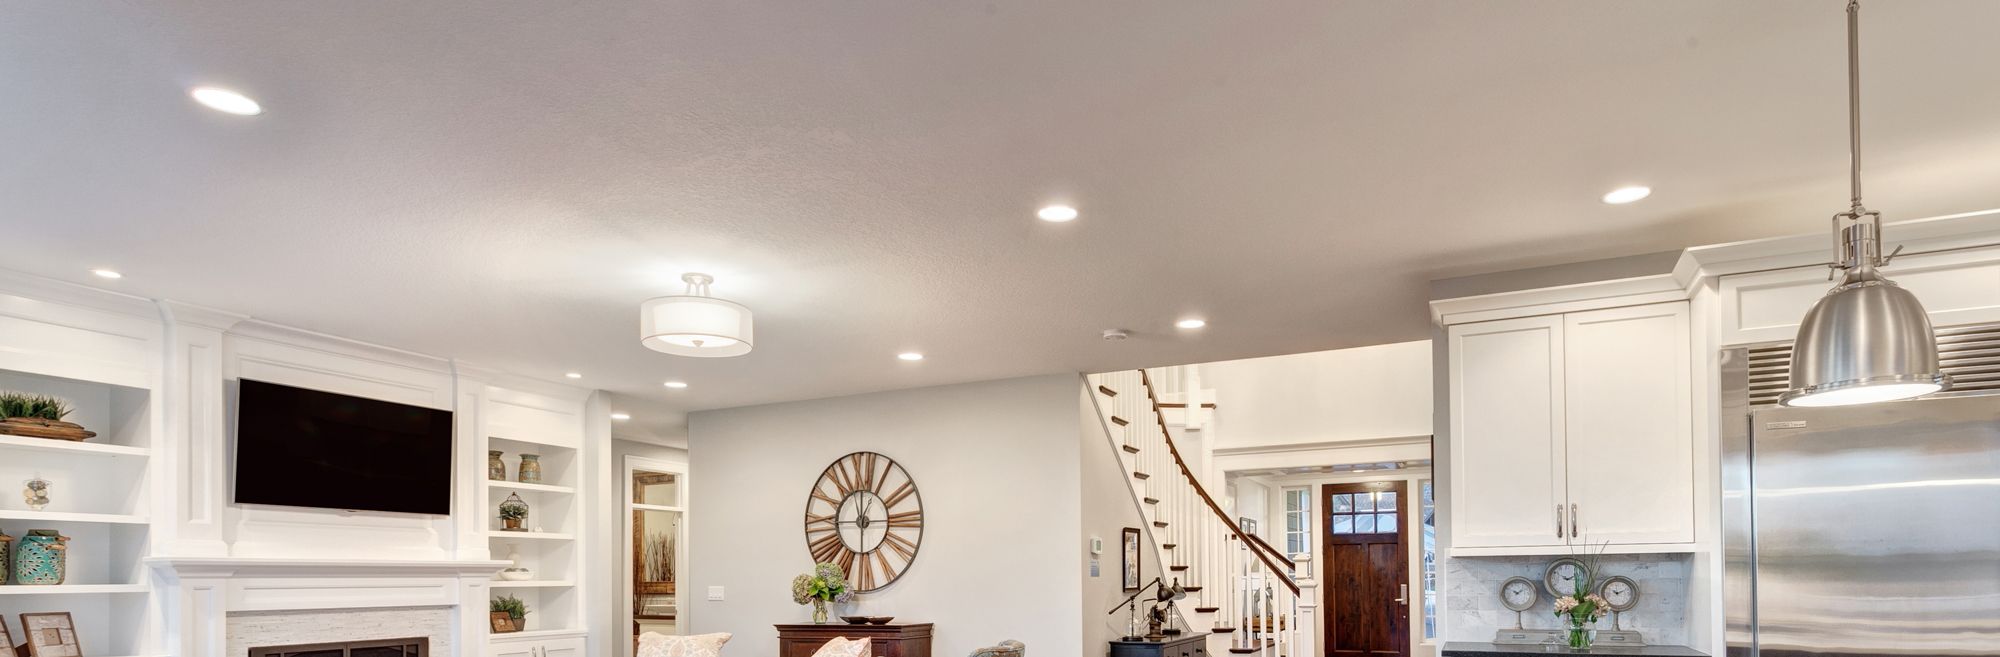 downlights installed in an older home